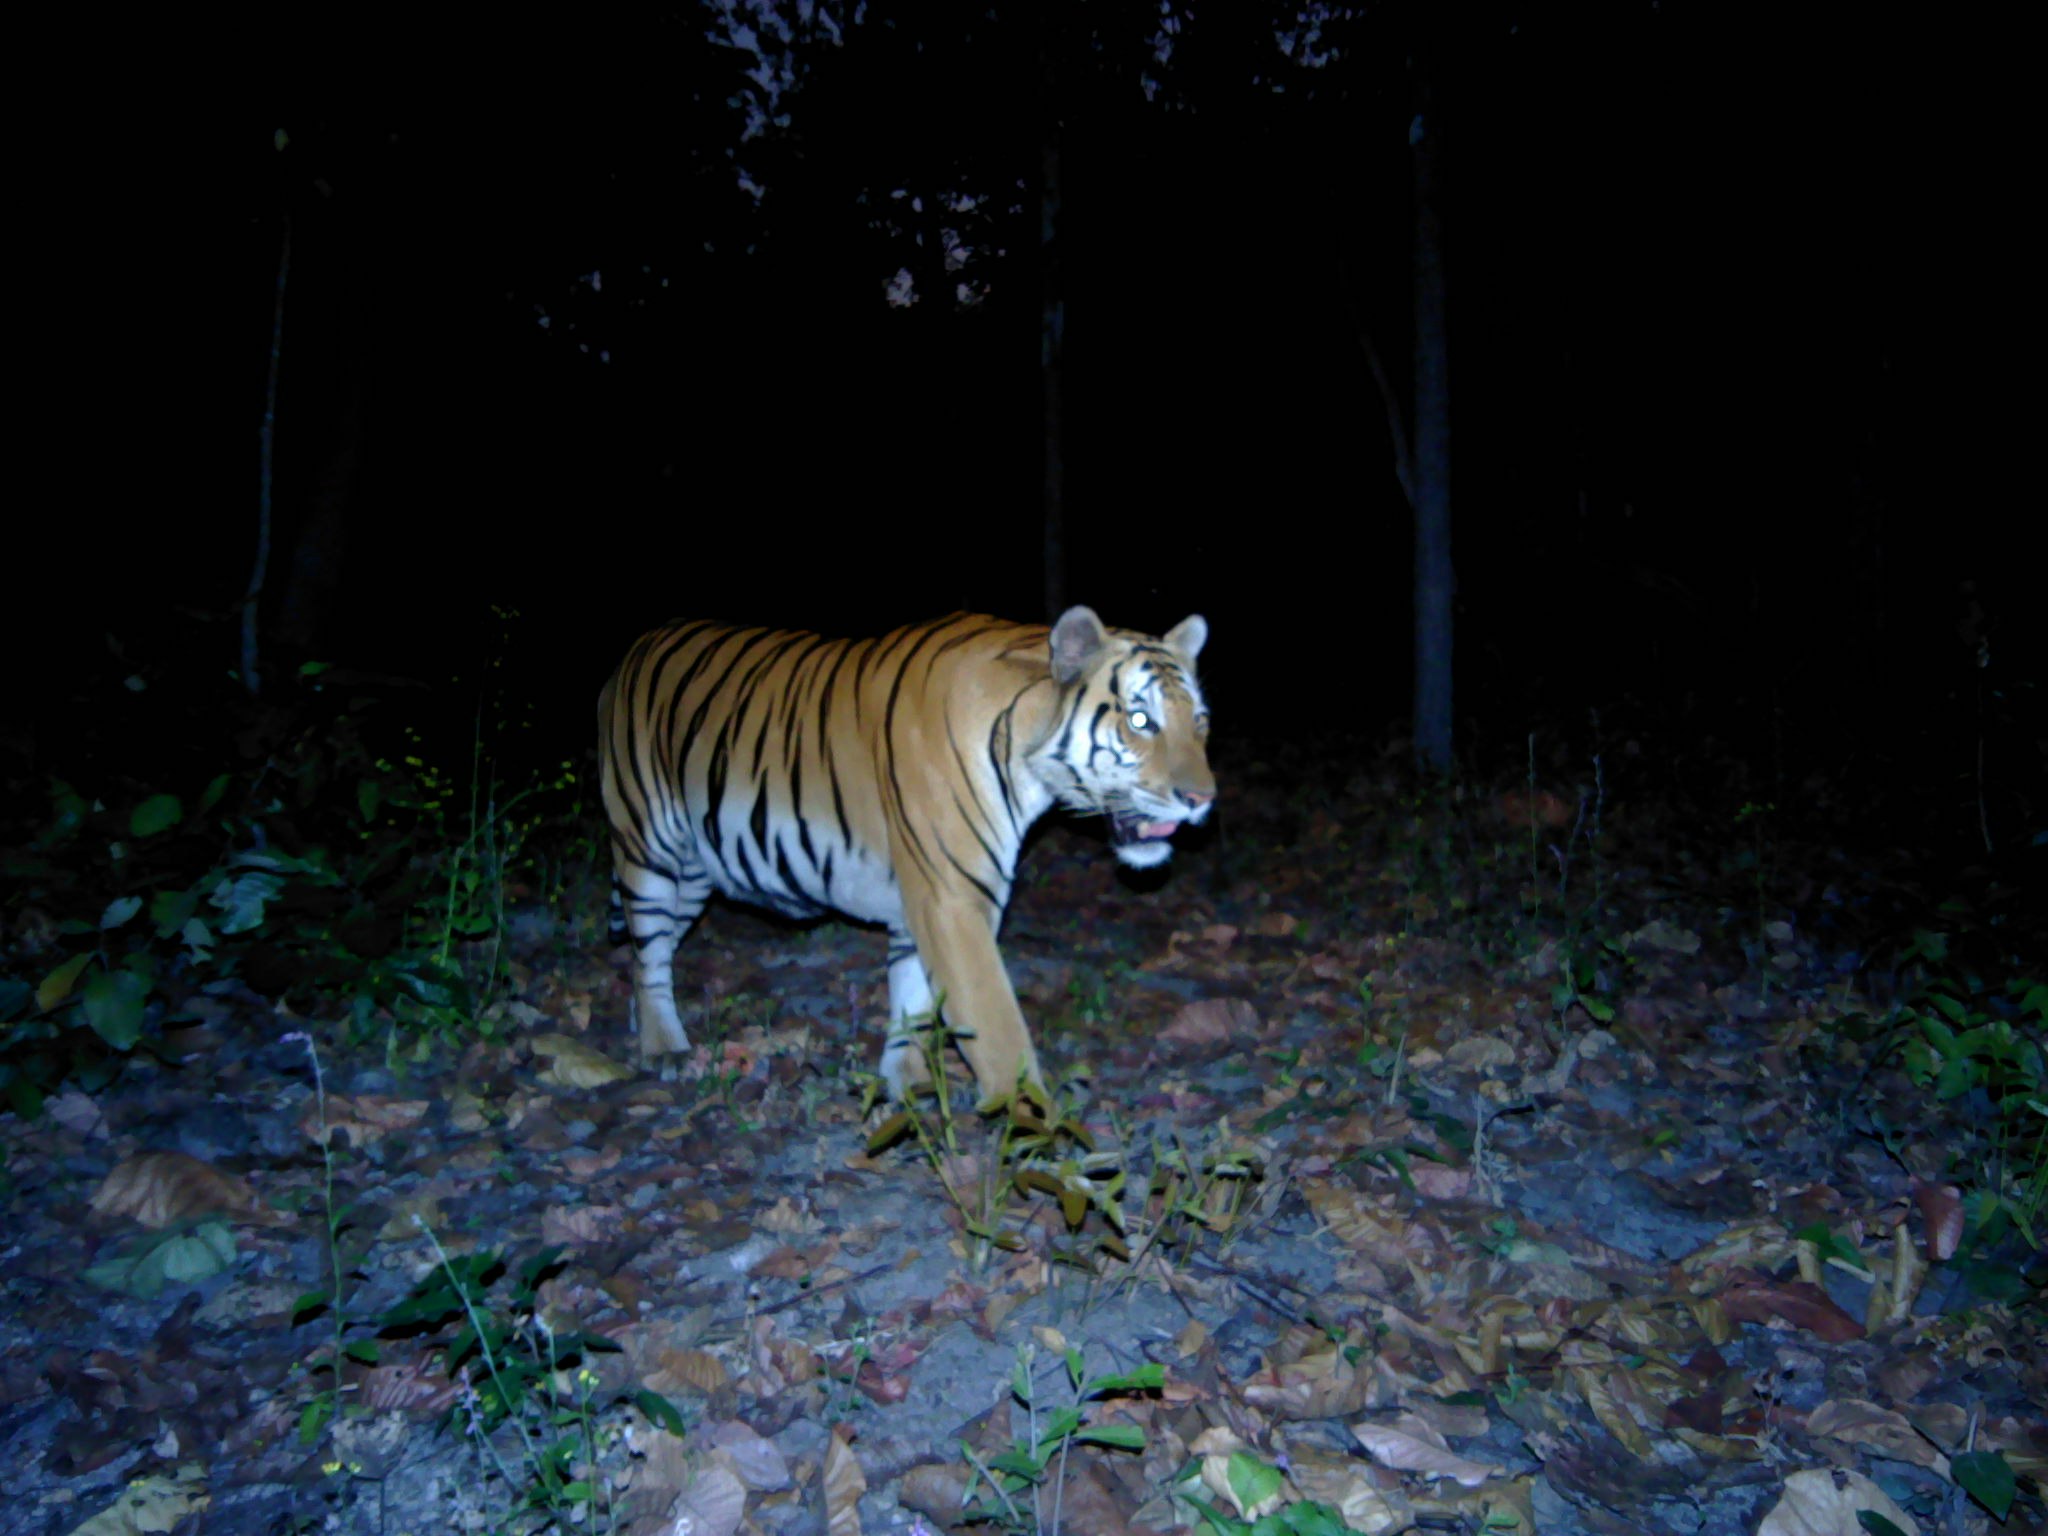 World's second breeding population of Indochinese tigers discovered in  Thailand's forests